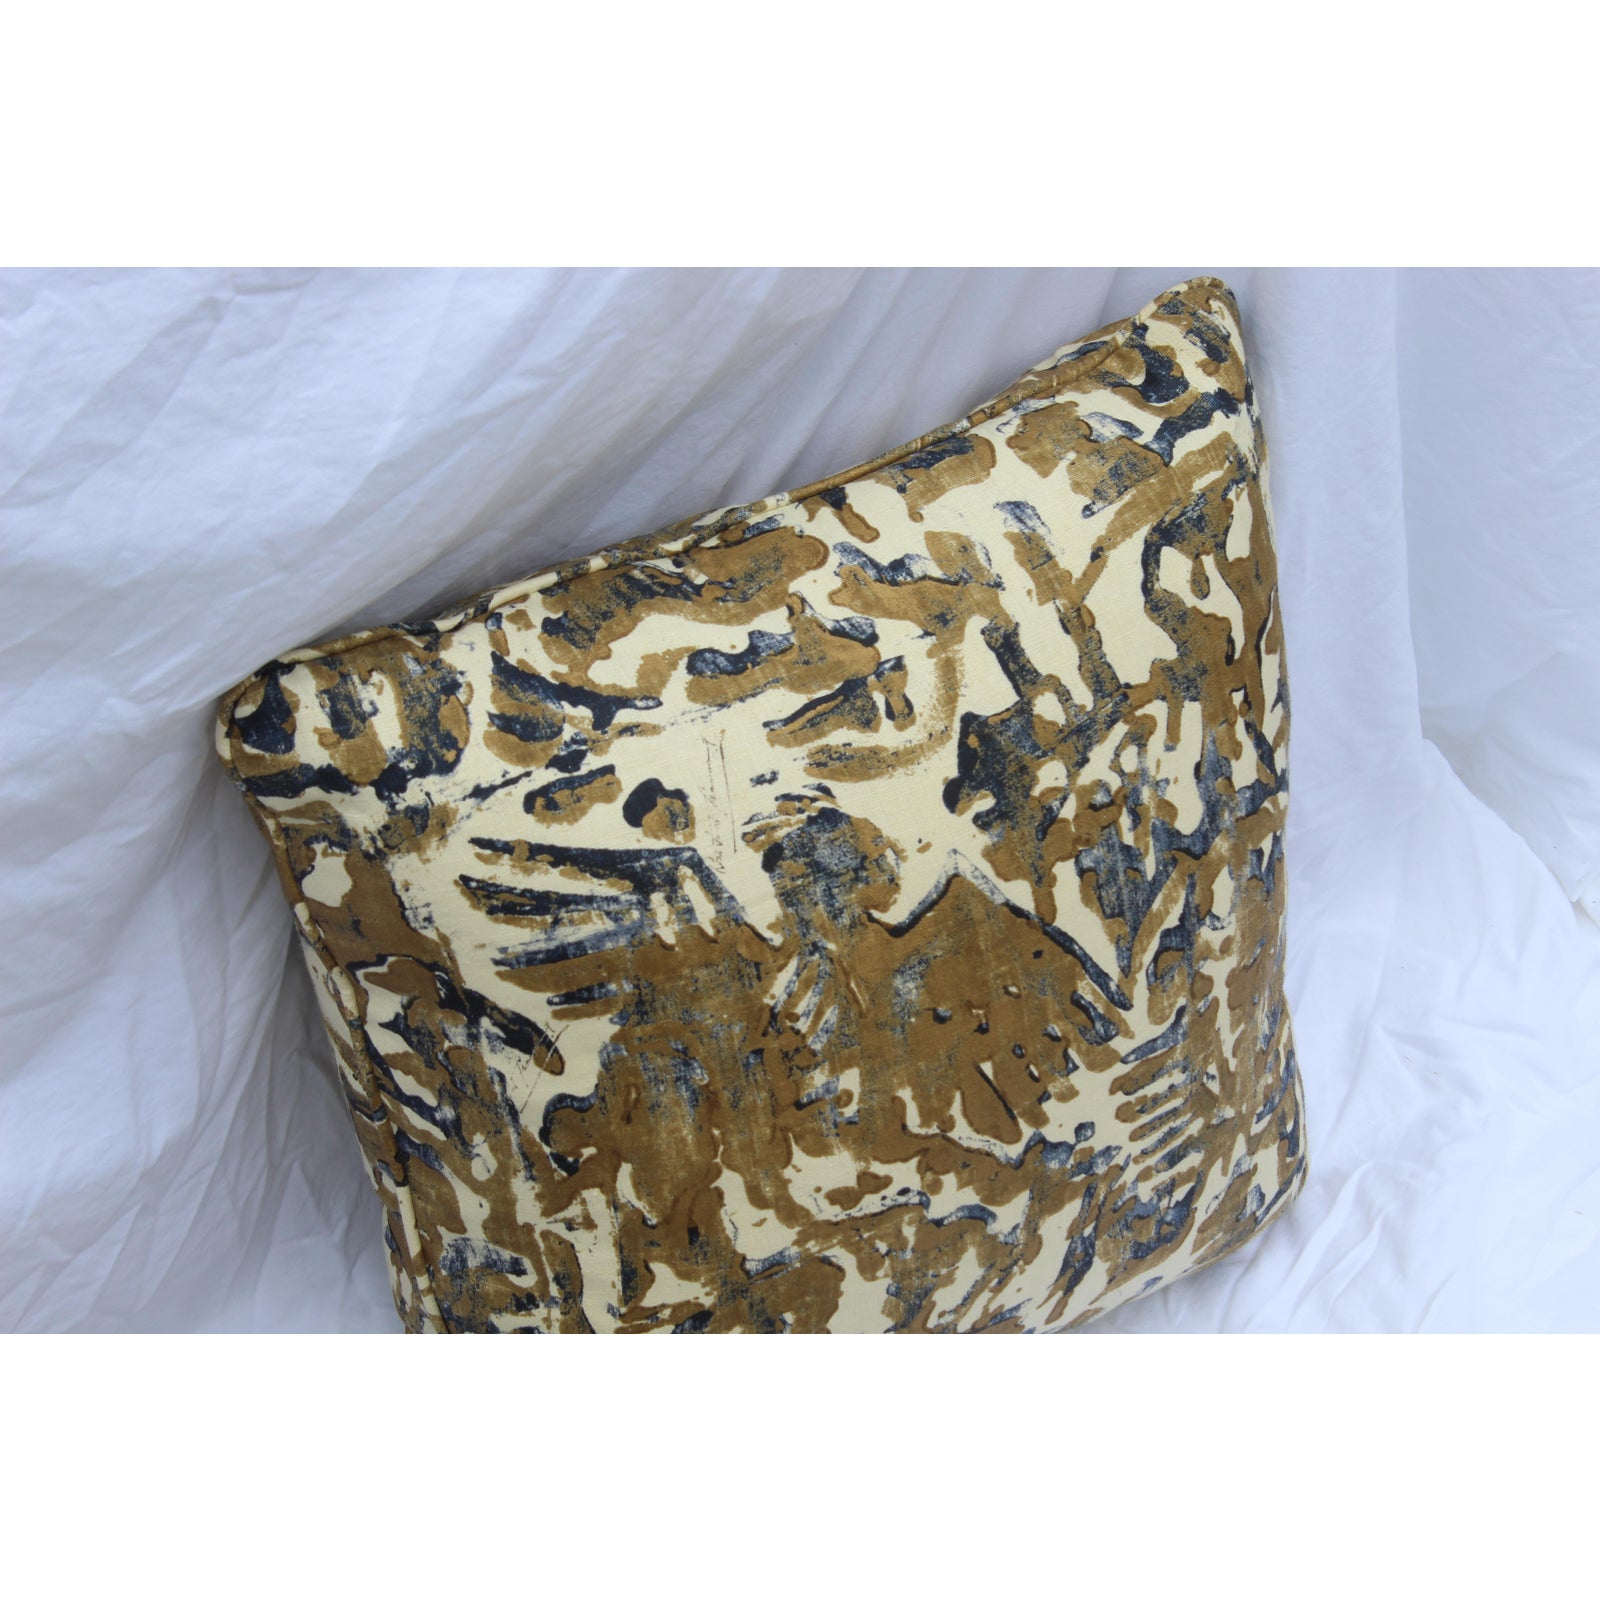 contemporary-printed-linen-navy-blue-and-bronze-down-pillows-a-pair-7065